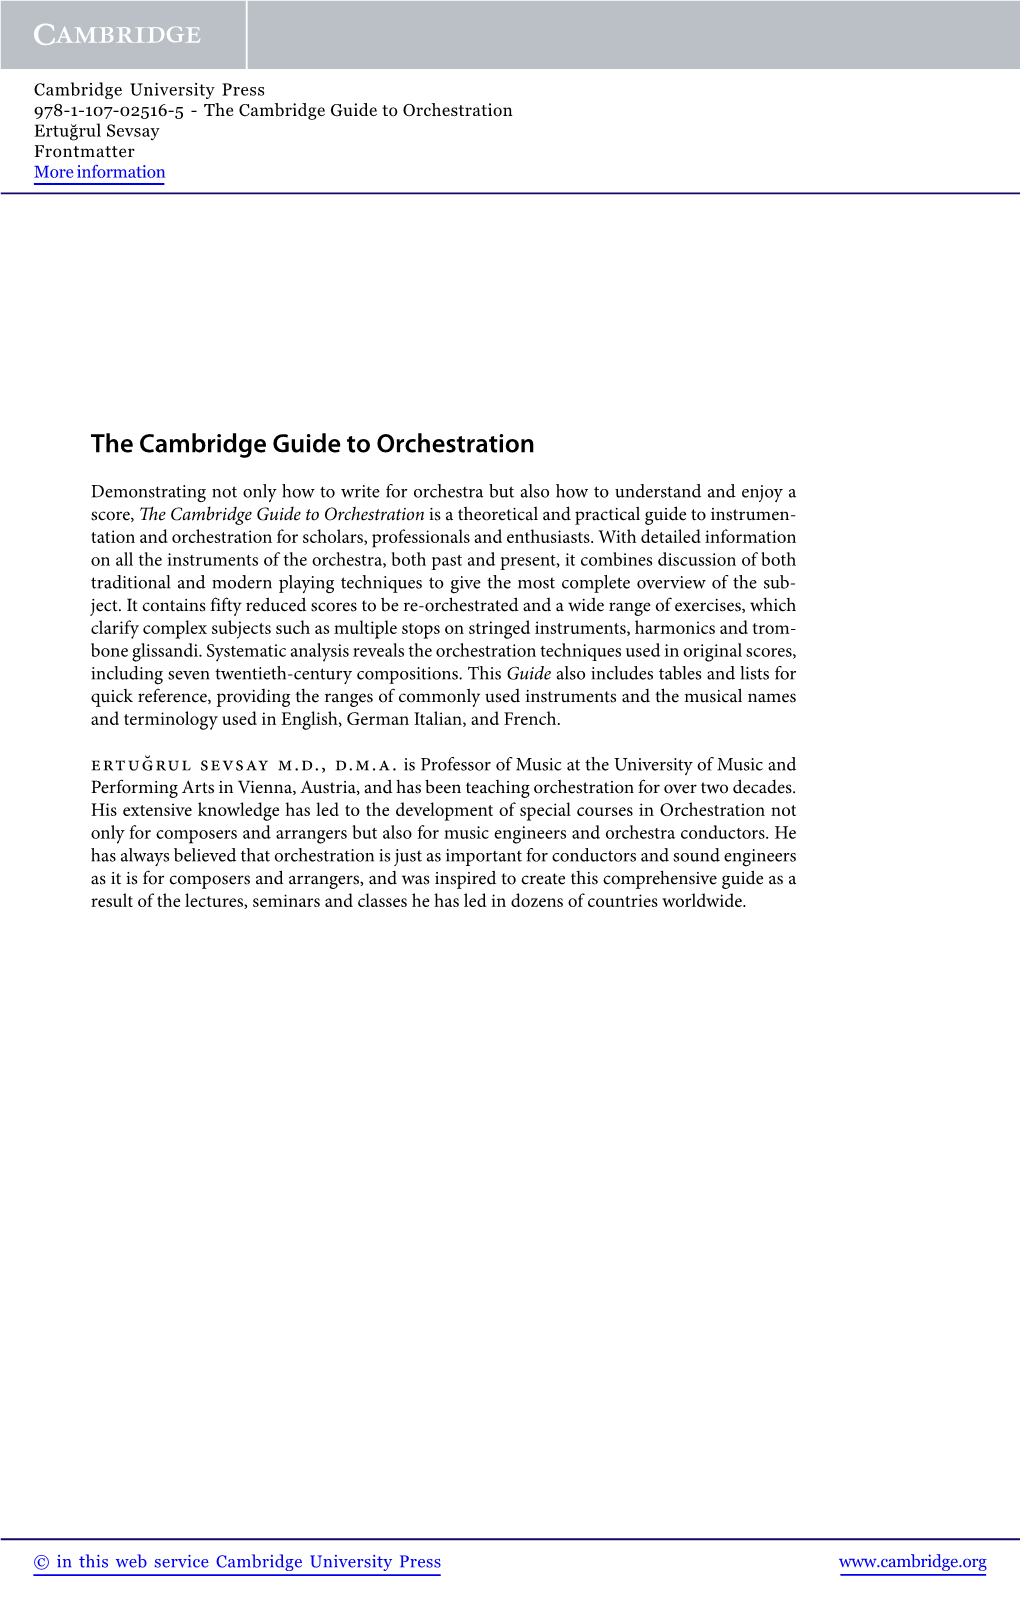 The Cambridge Guide to Orchestration Ertuğrul Sevsay Frontmatter More Information